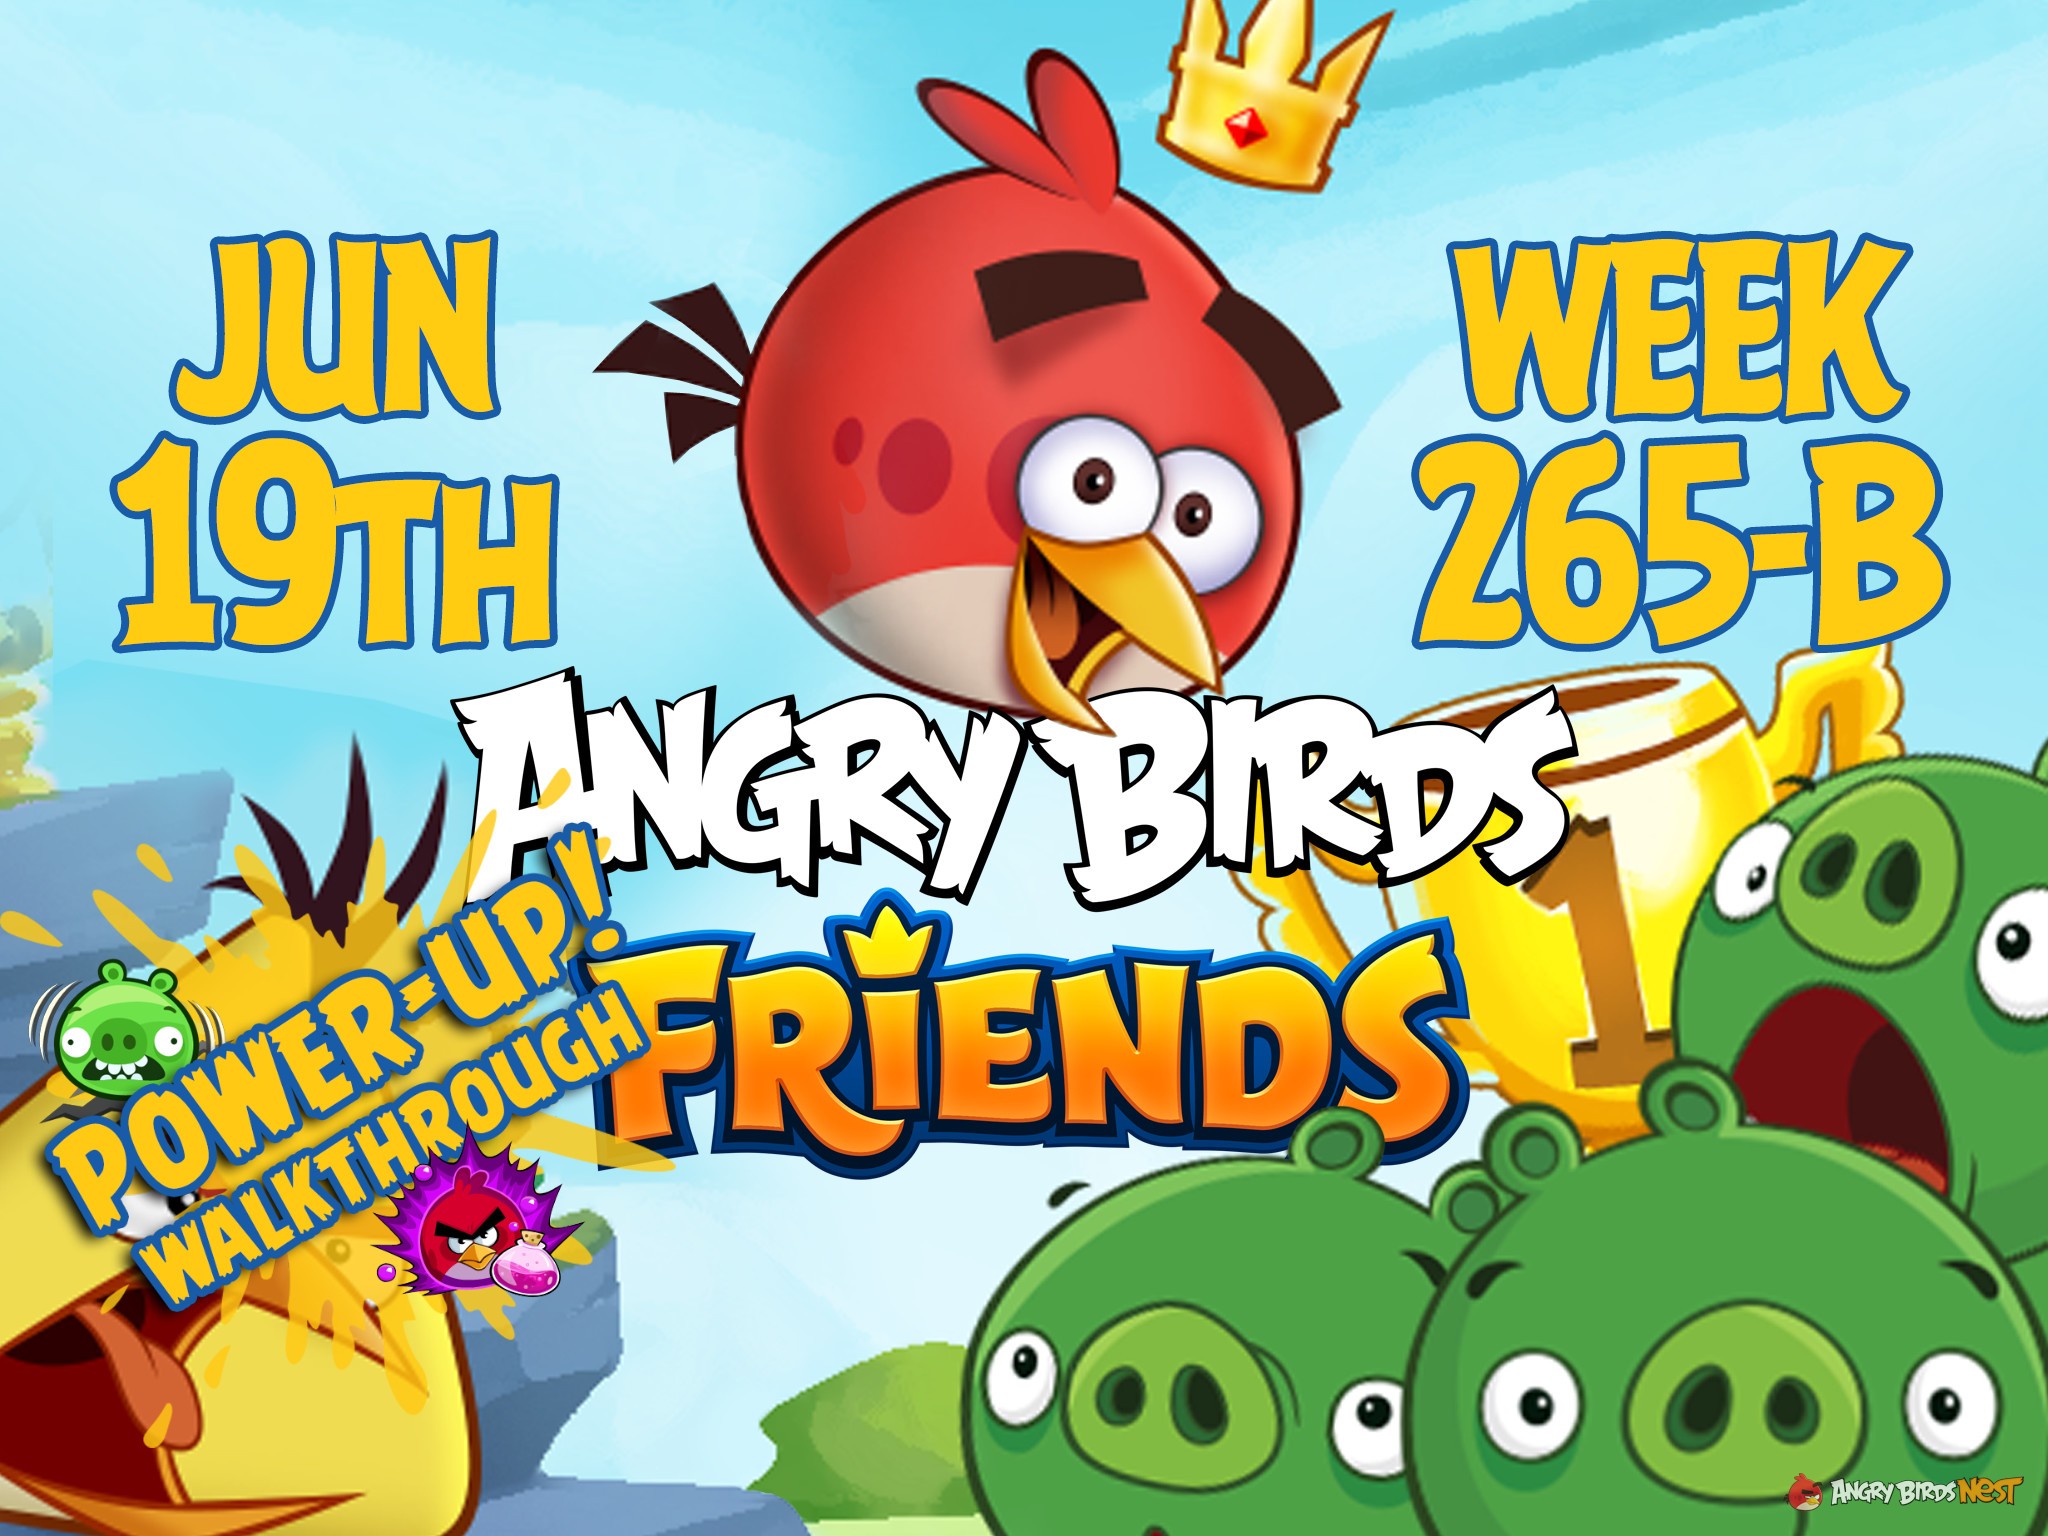 Angry Birds Friends Tournament Week 265-B Feature Image PU